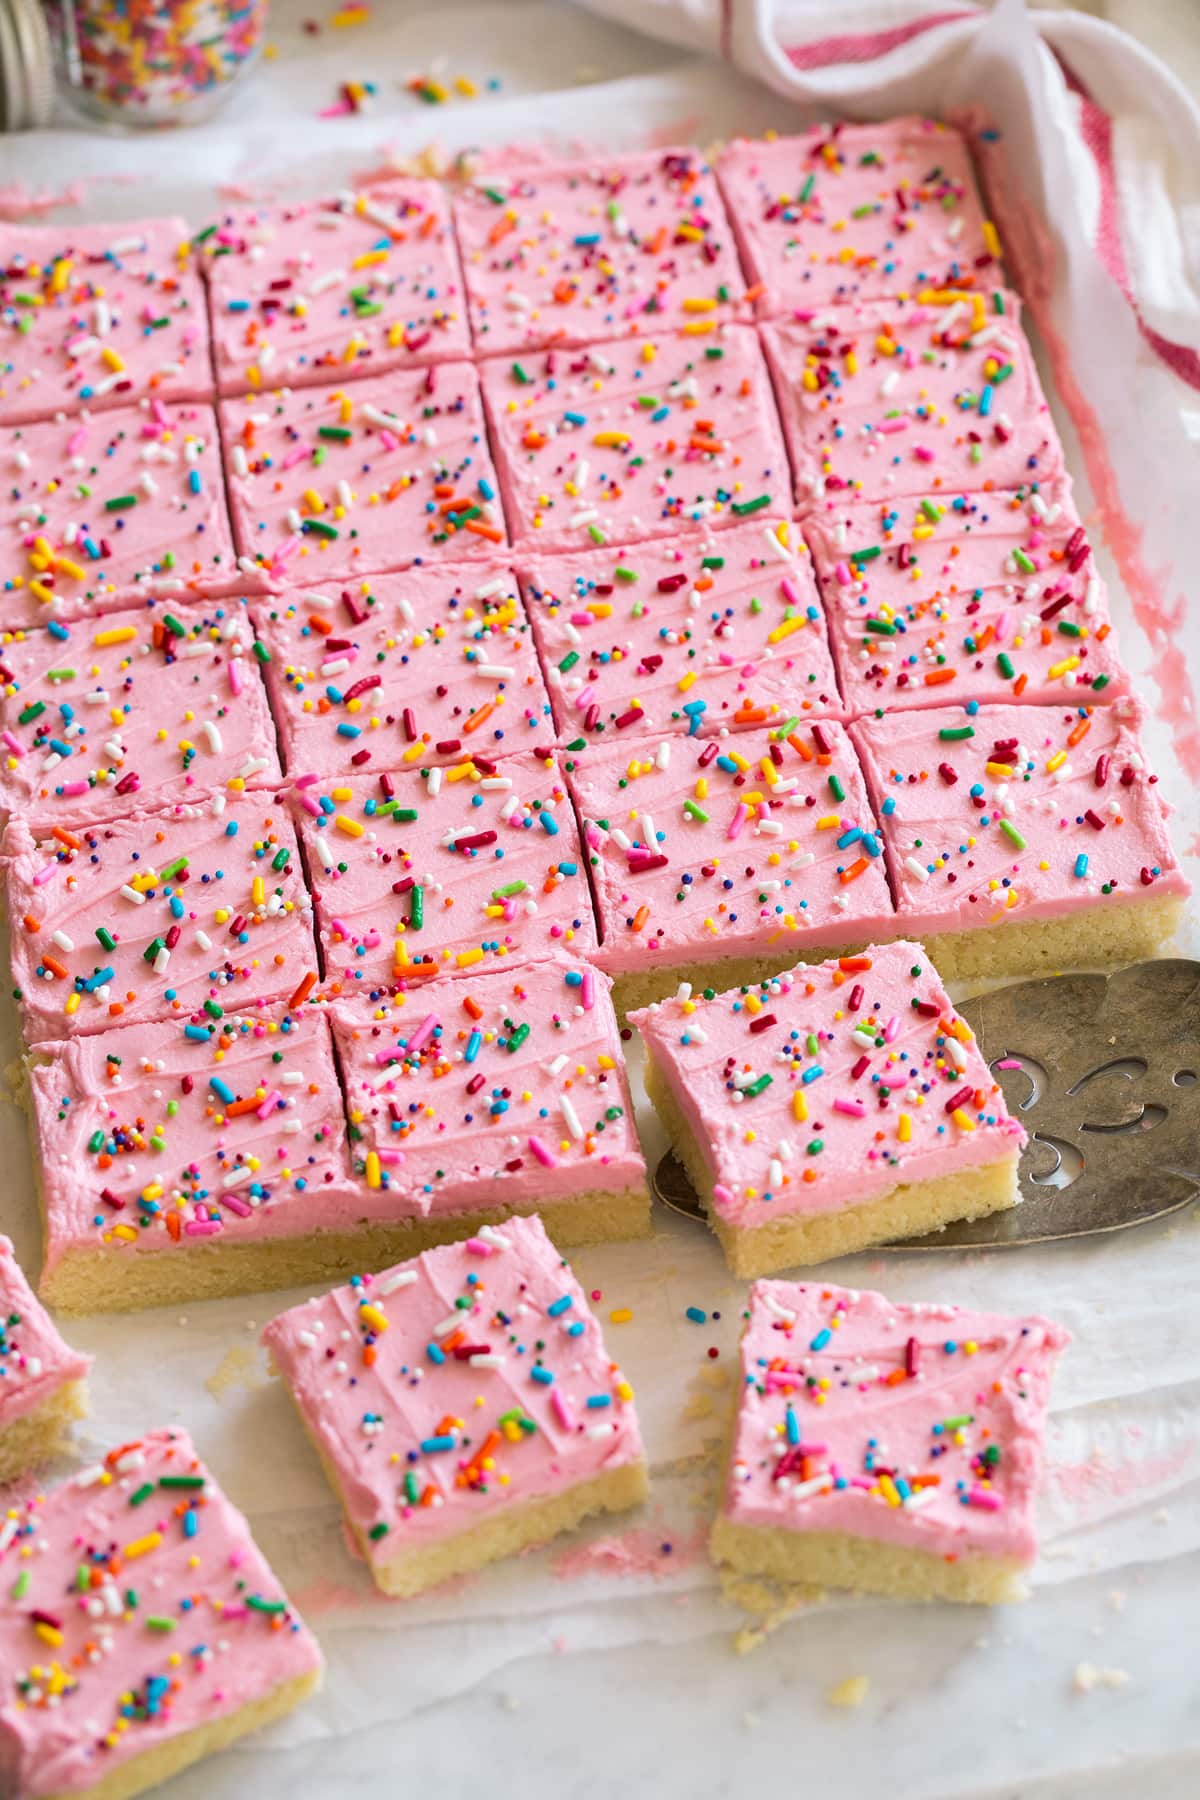 Sugar cookie bars shown cut and laying on parchment paper.